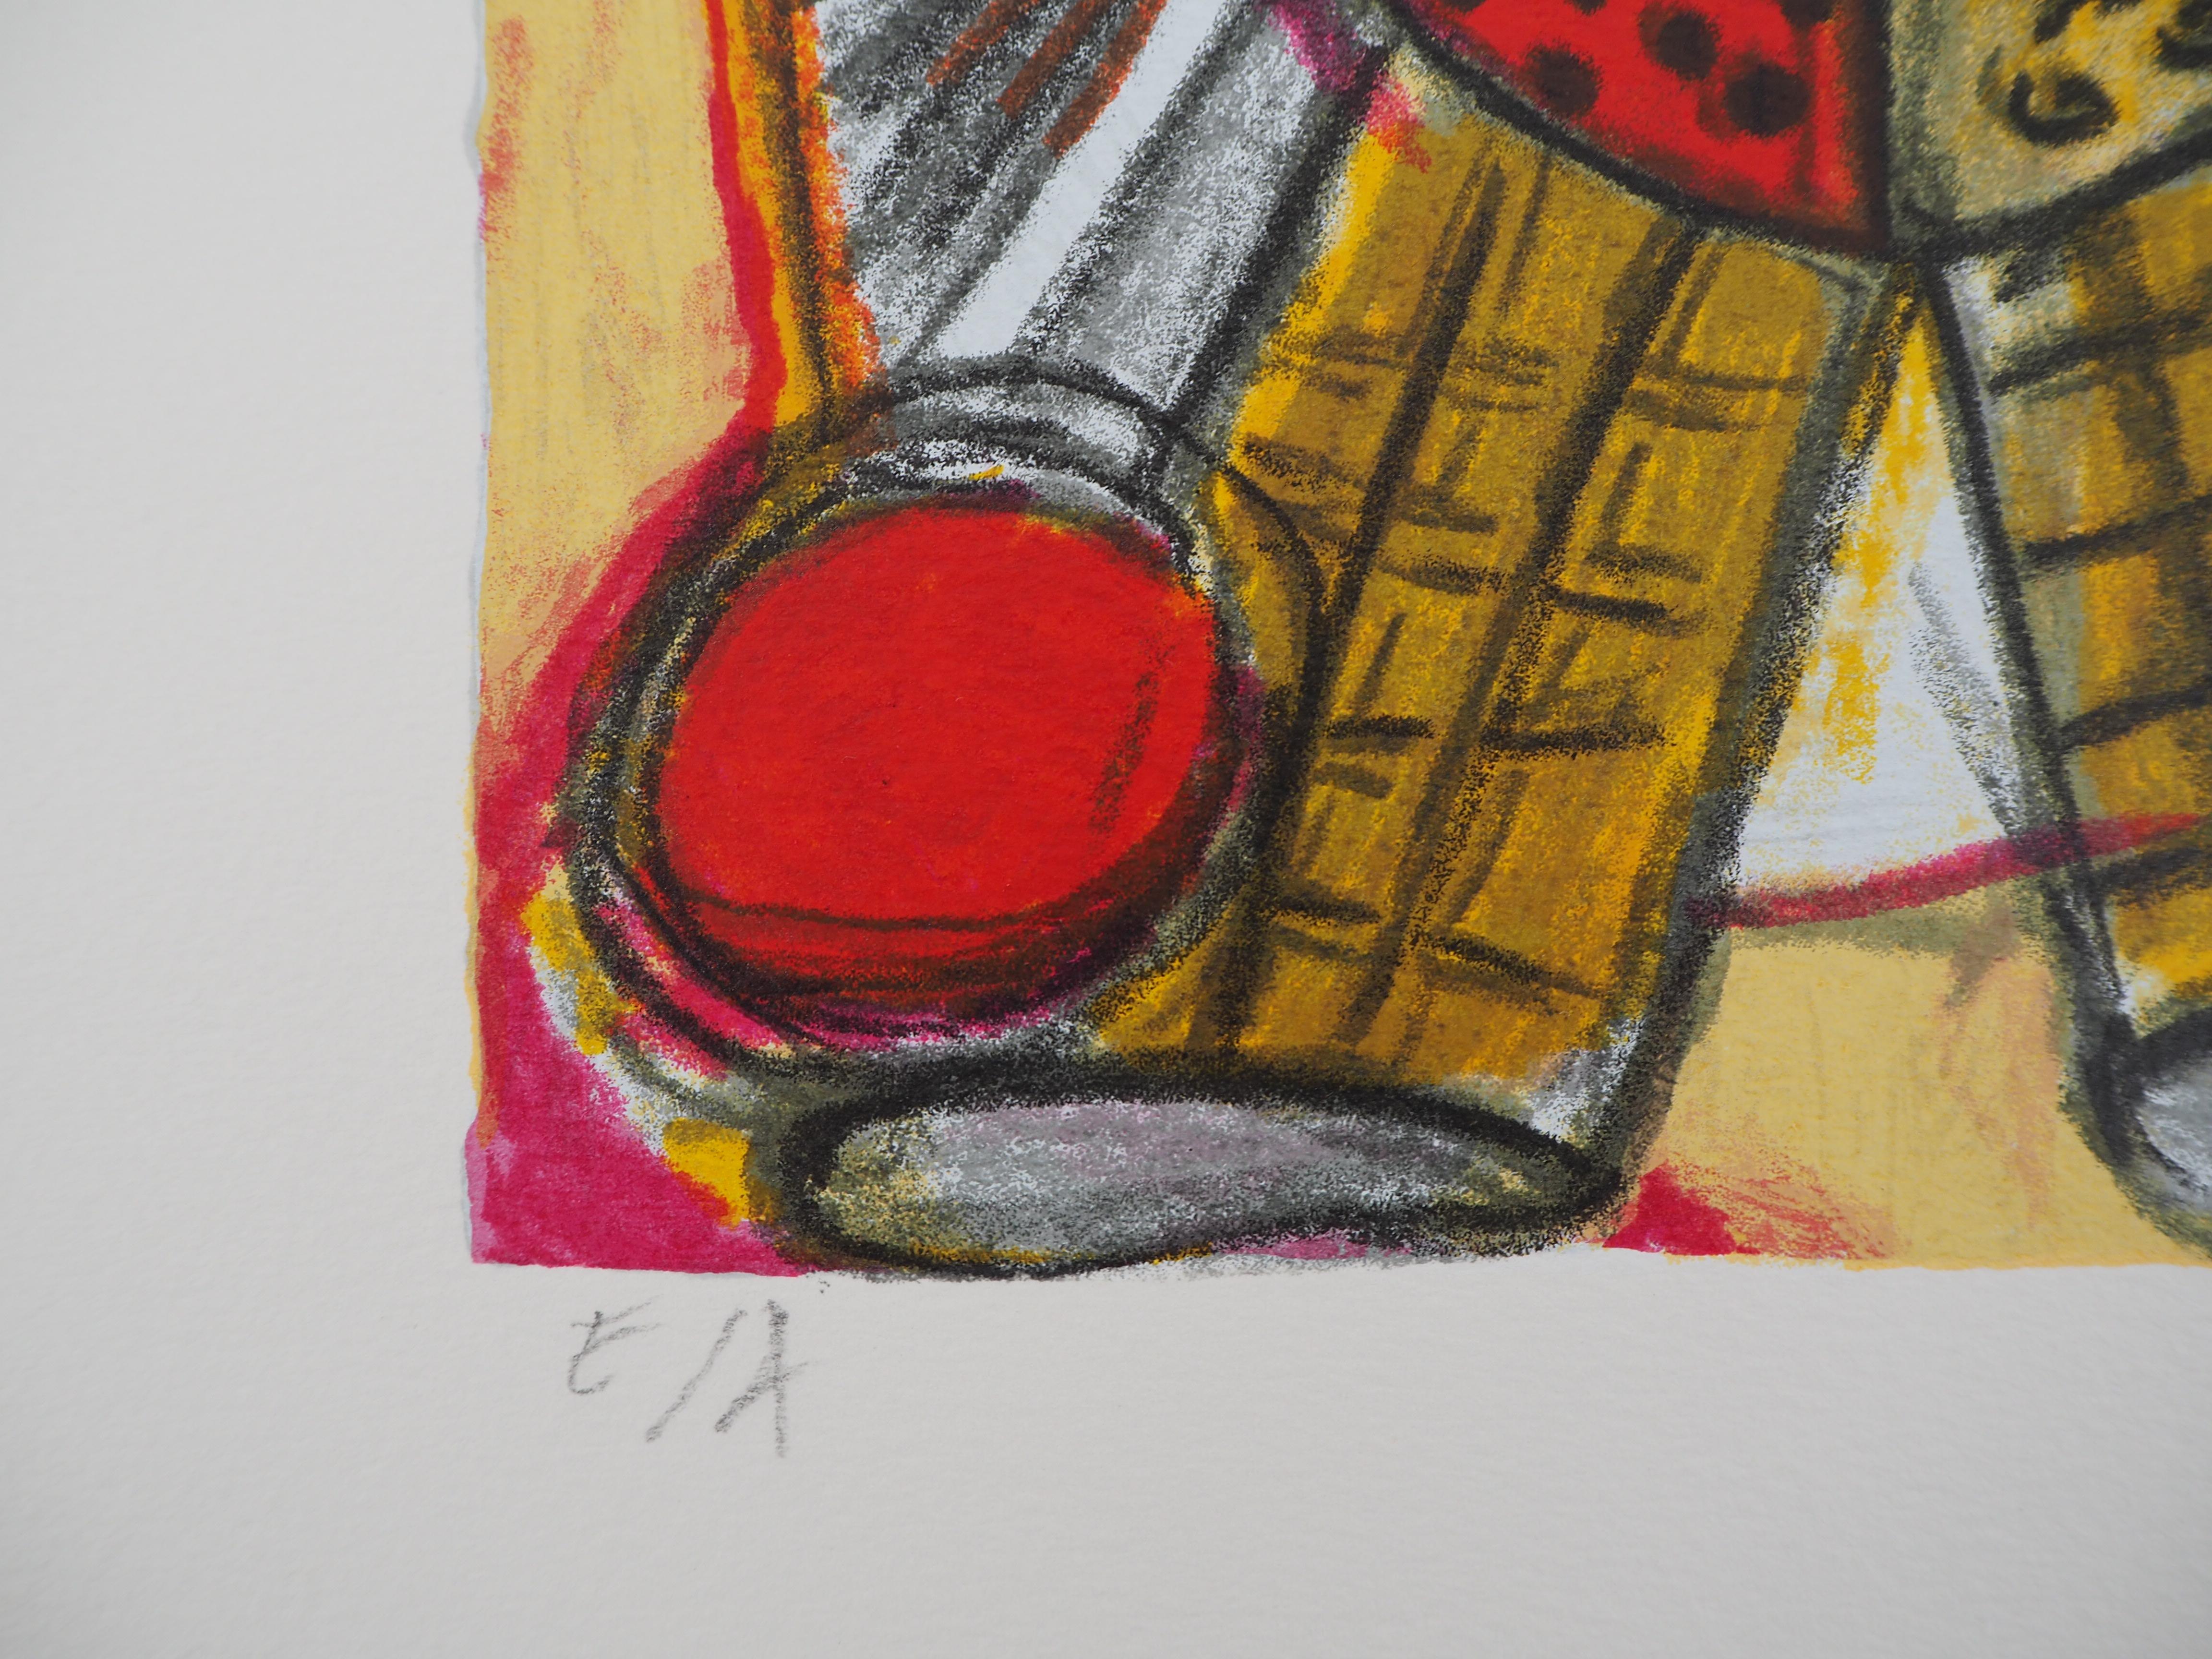 Little Clown in Red and Yellow - Original handsigned lithograph - 200 ex - Surrealist Print by Corneille